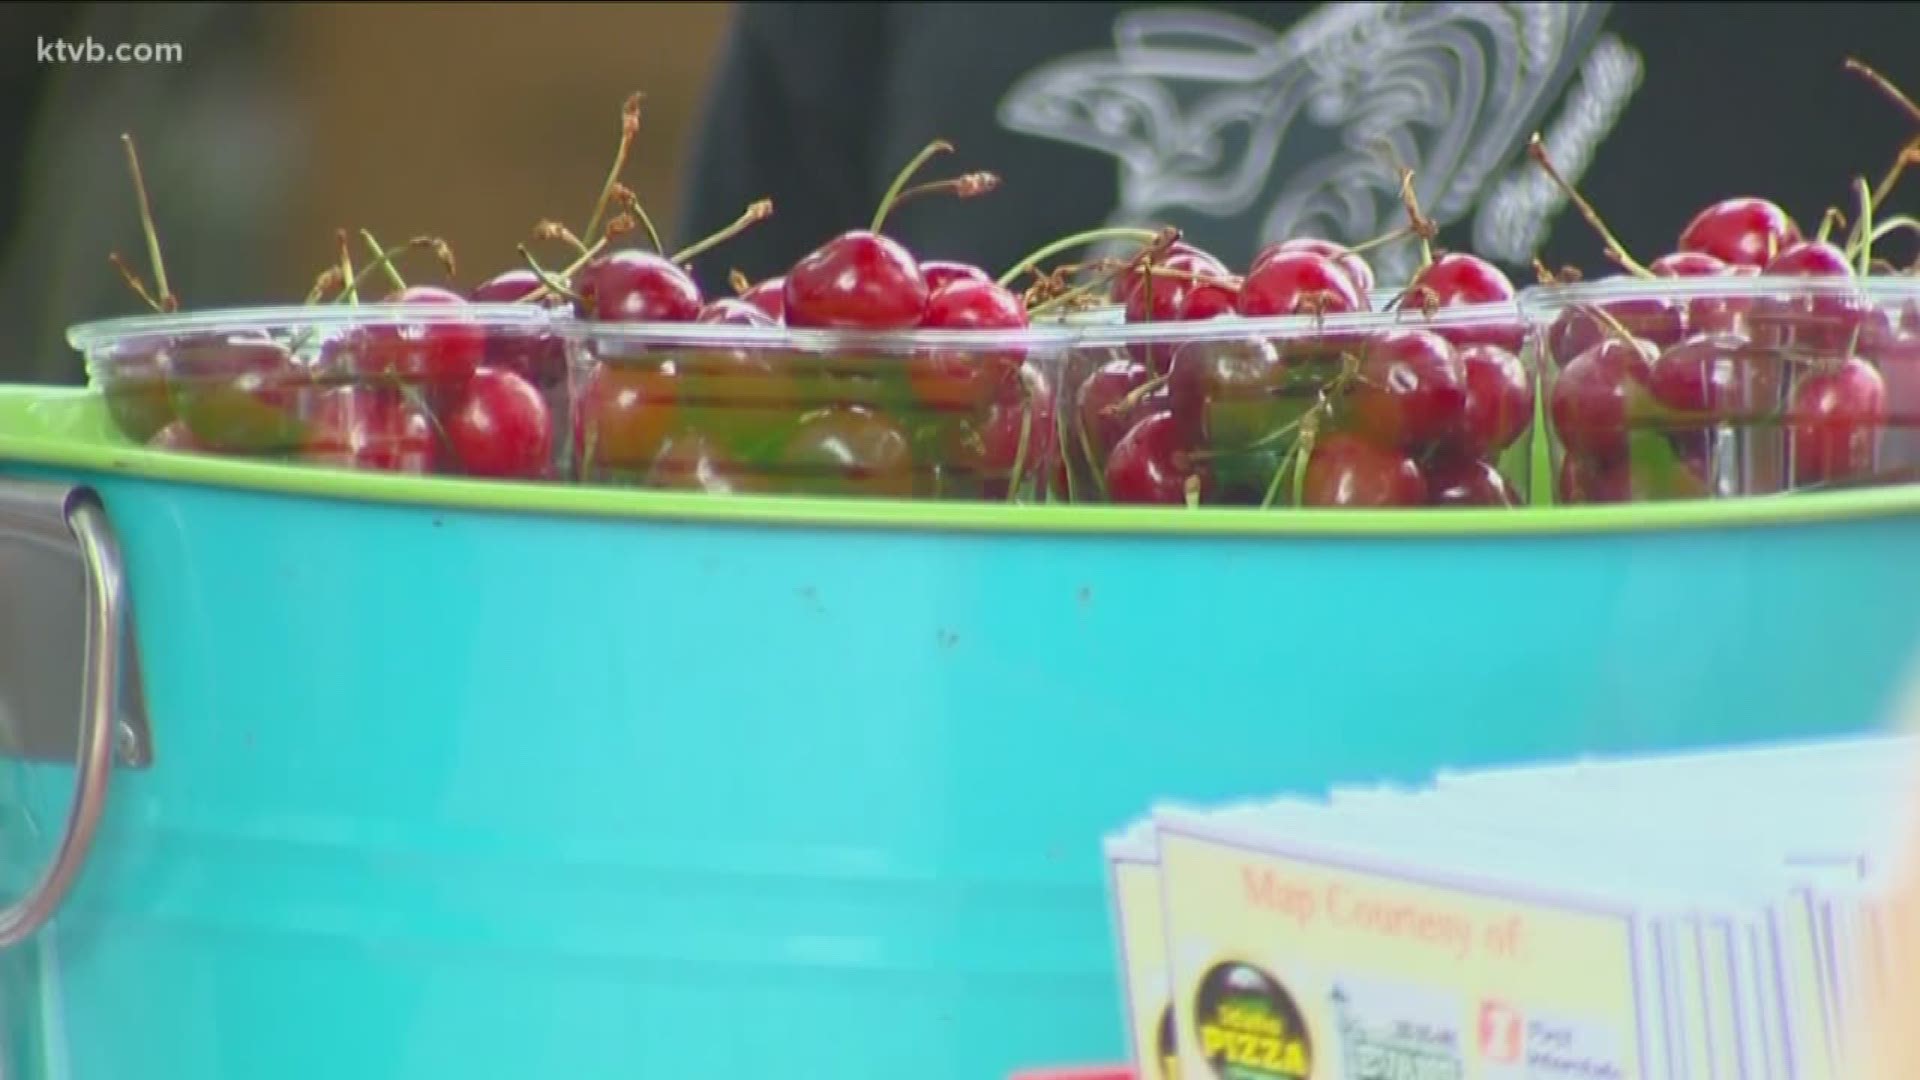 The Gem County Chamber of Commerce said it was not possible to have a safe Cherry Festival this year due to COVID-19.